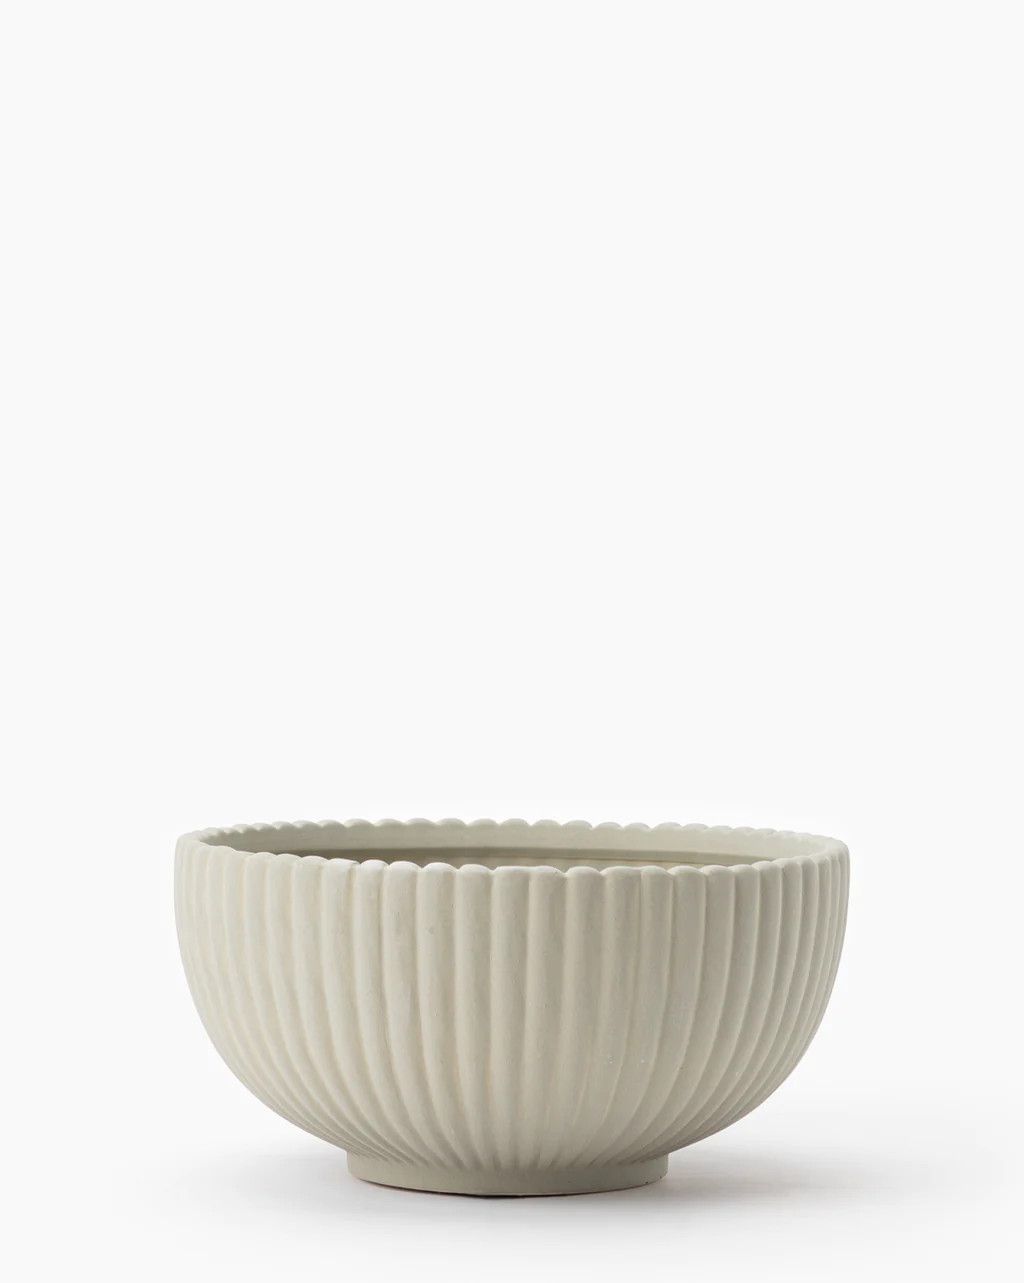 Reeded Bowl | McGee & Co.